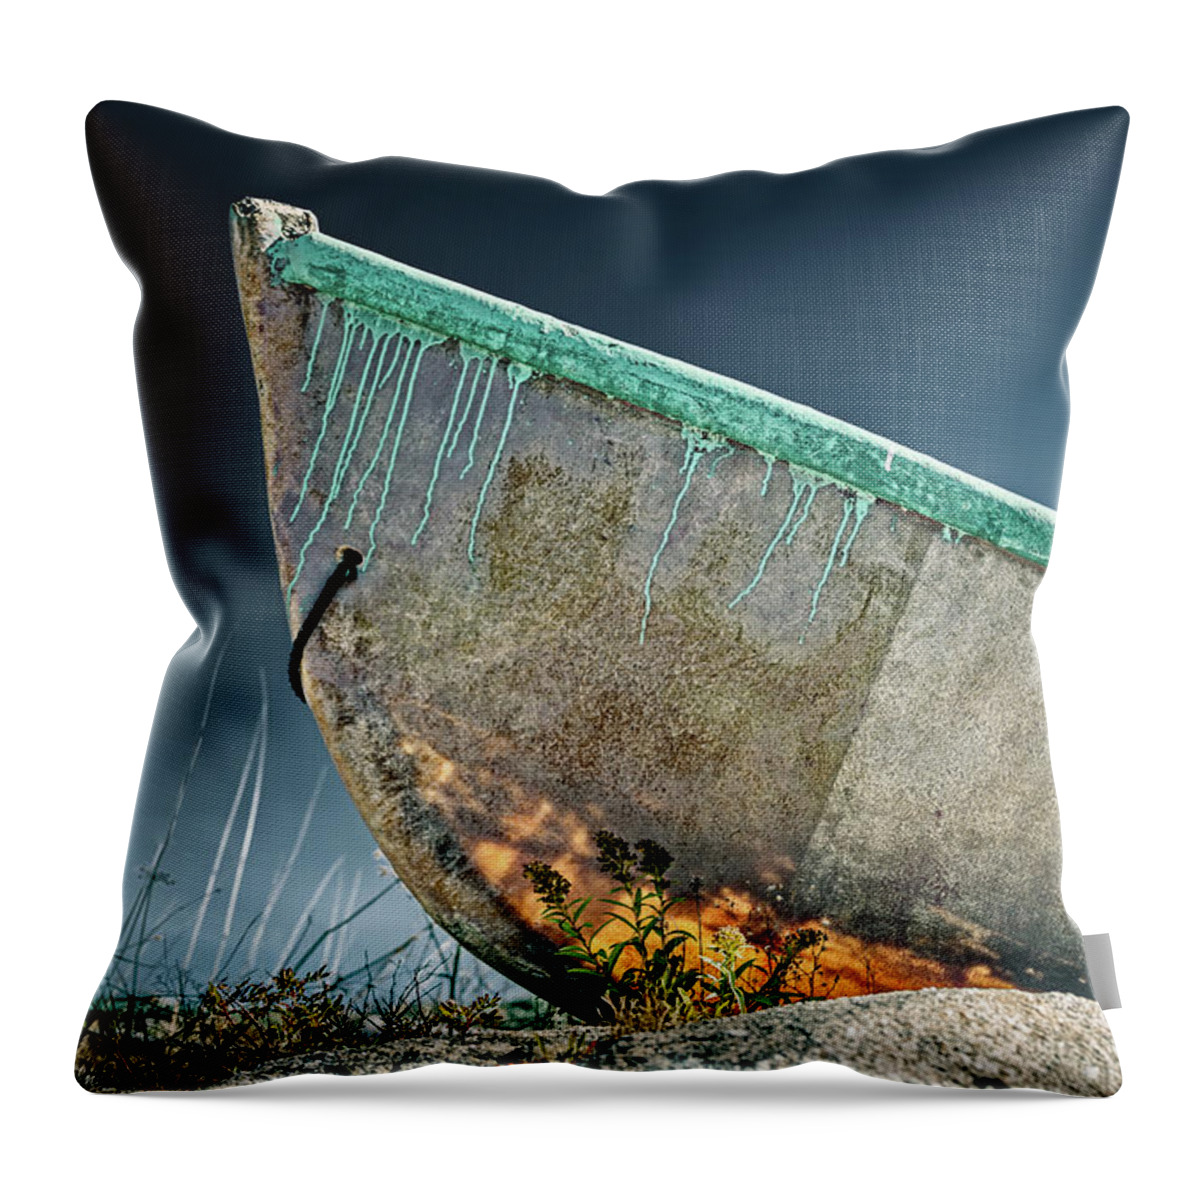 Boat Throw Pillow featuring the pyrography Abandoned Boat on the Rocks by Manpreet Sokhi